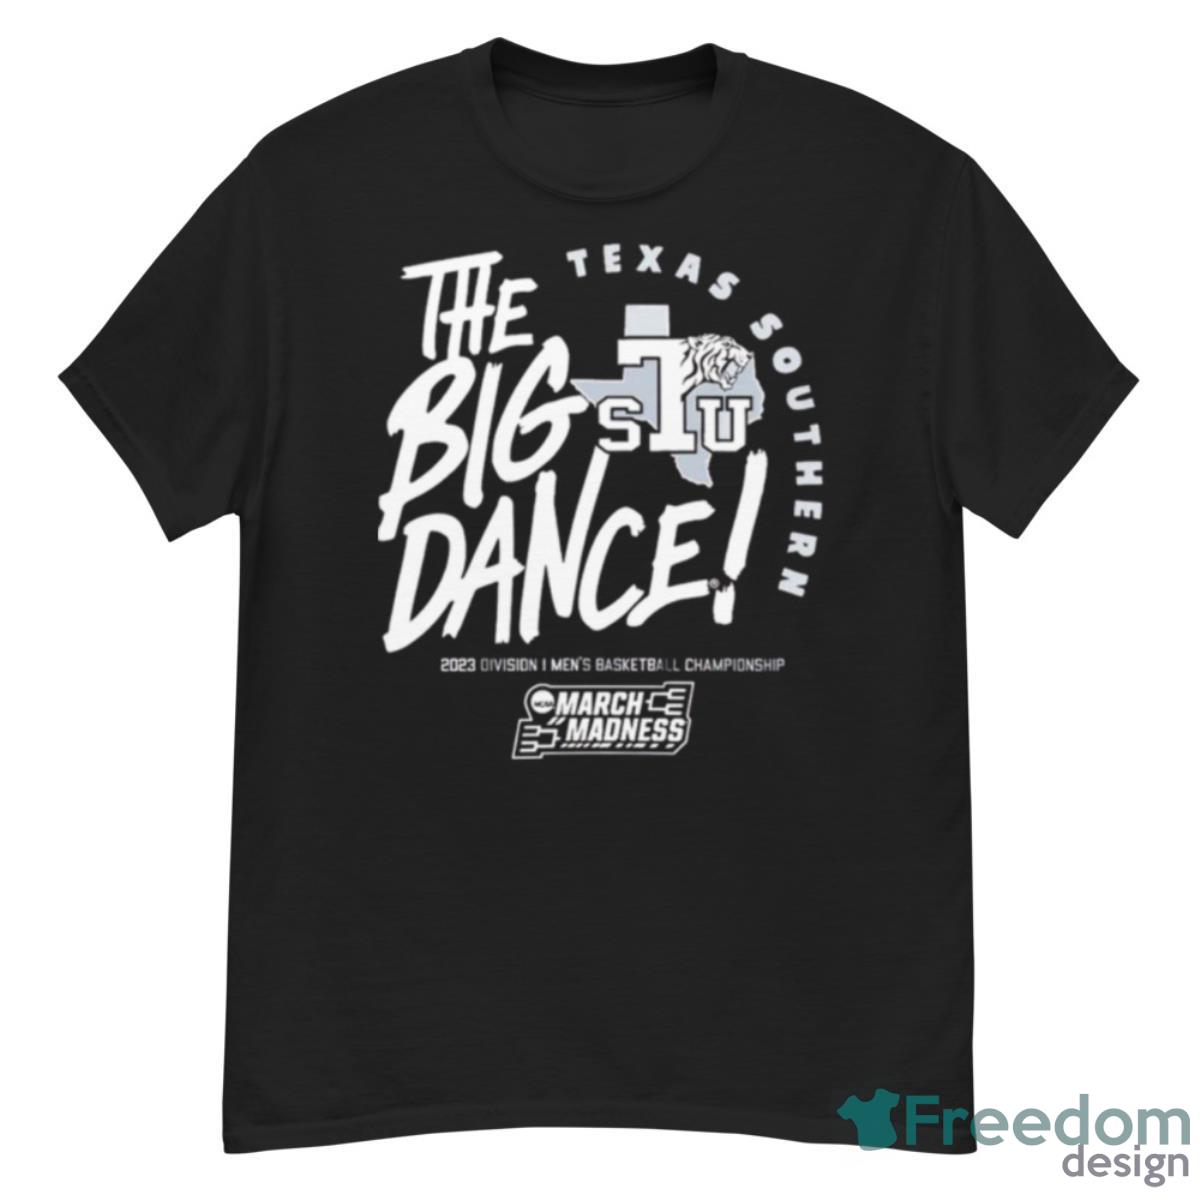 Texas Southern the big dance March Madness 2023 Division men’s basketball championship shirt - G500 Men’s Classic T-Shirt